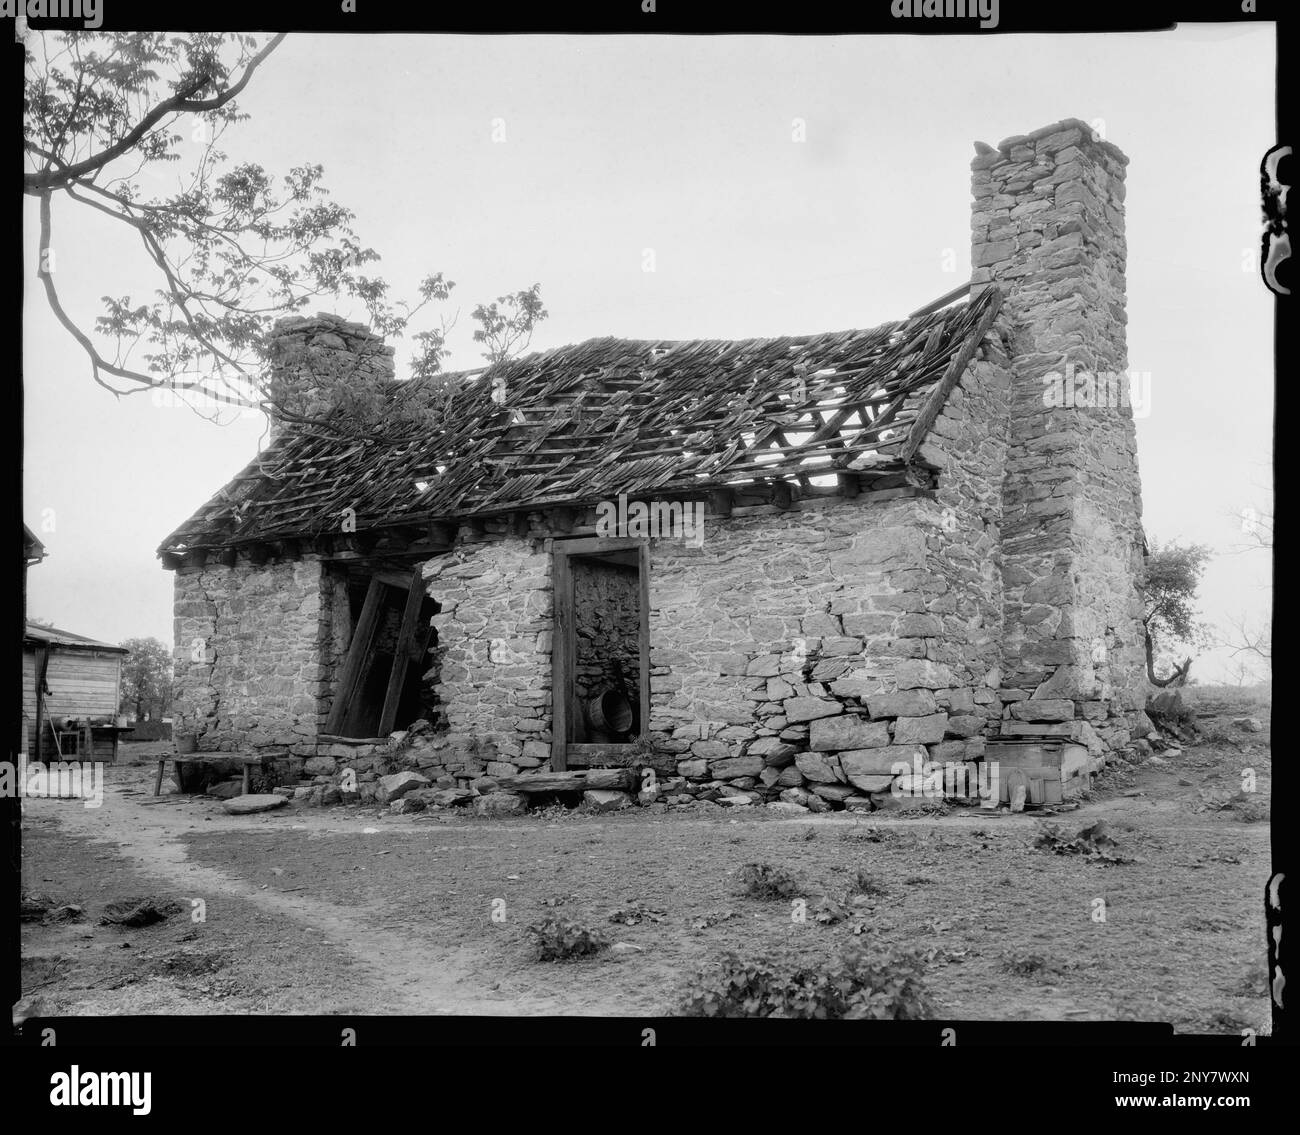 Ruined Slave Quarters, Berryville vic., Clarke County, Virginia. Carnegie Survey of the Architecture of the South. United States  Virginia  Clarke County  Berryville vic, Stone buildings, Ruins, Slave quarters. Stock Photo